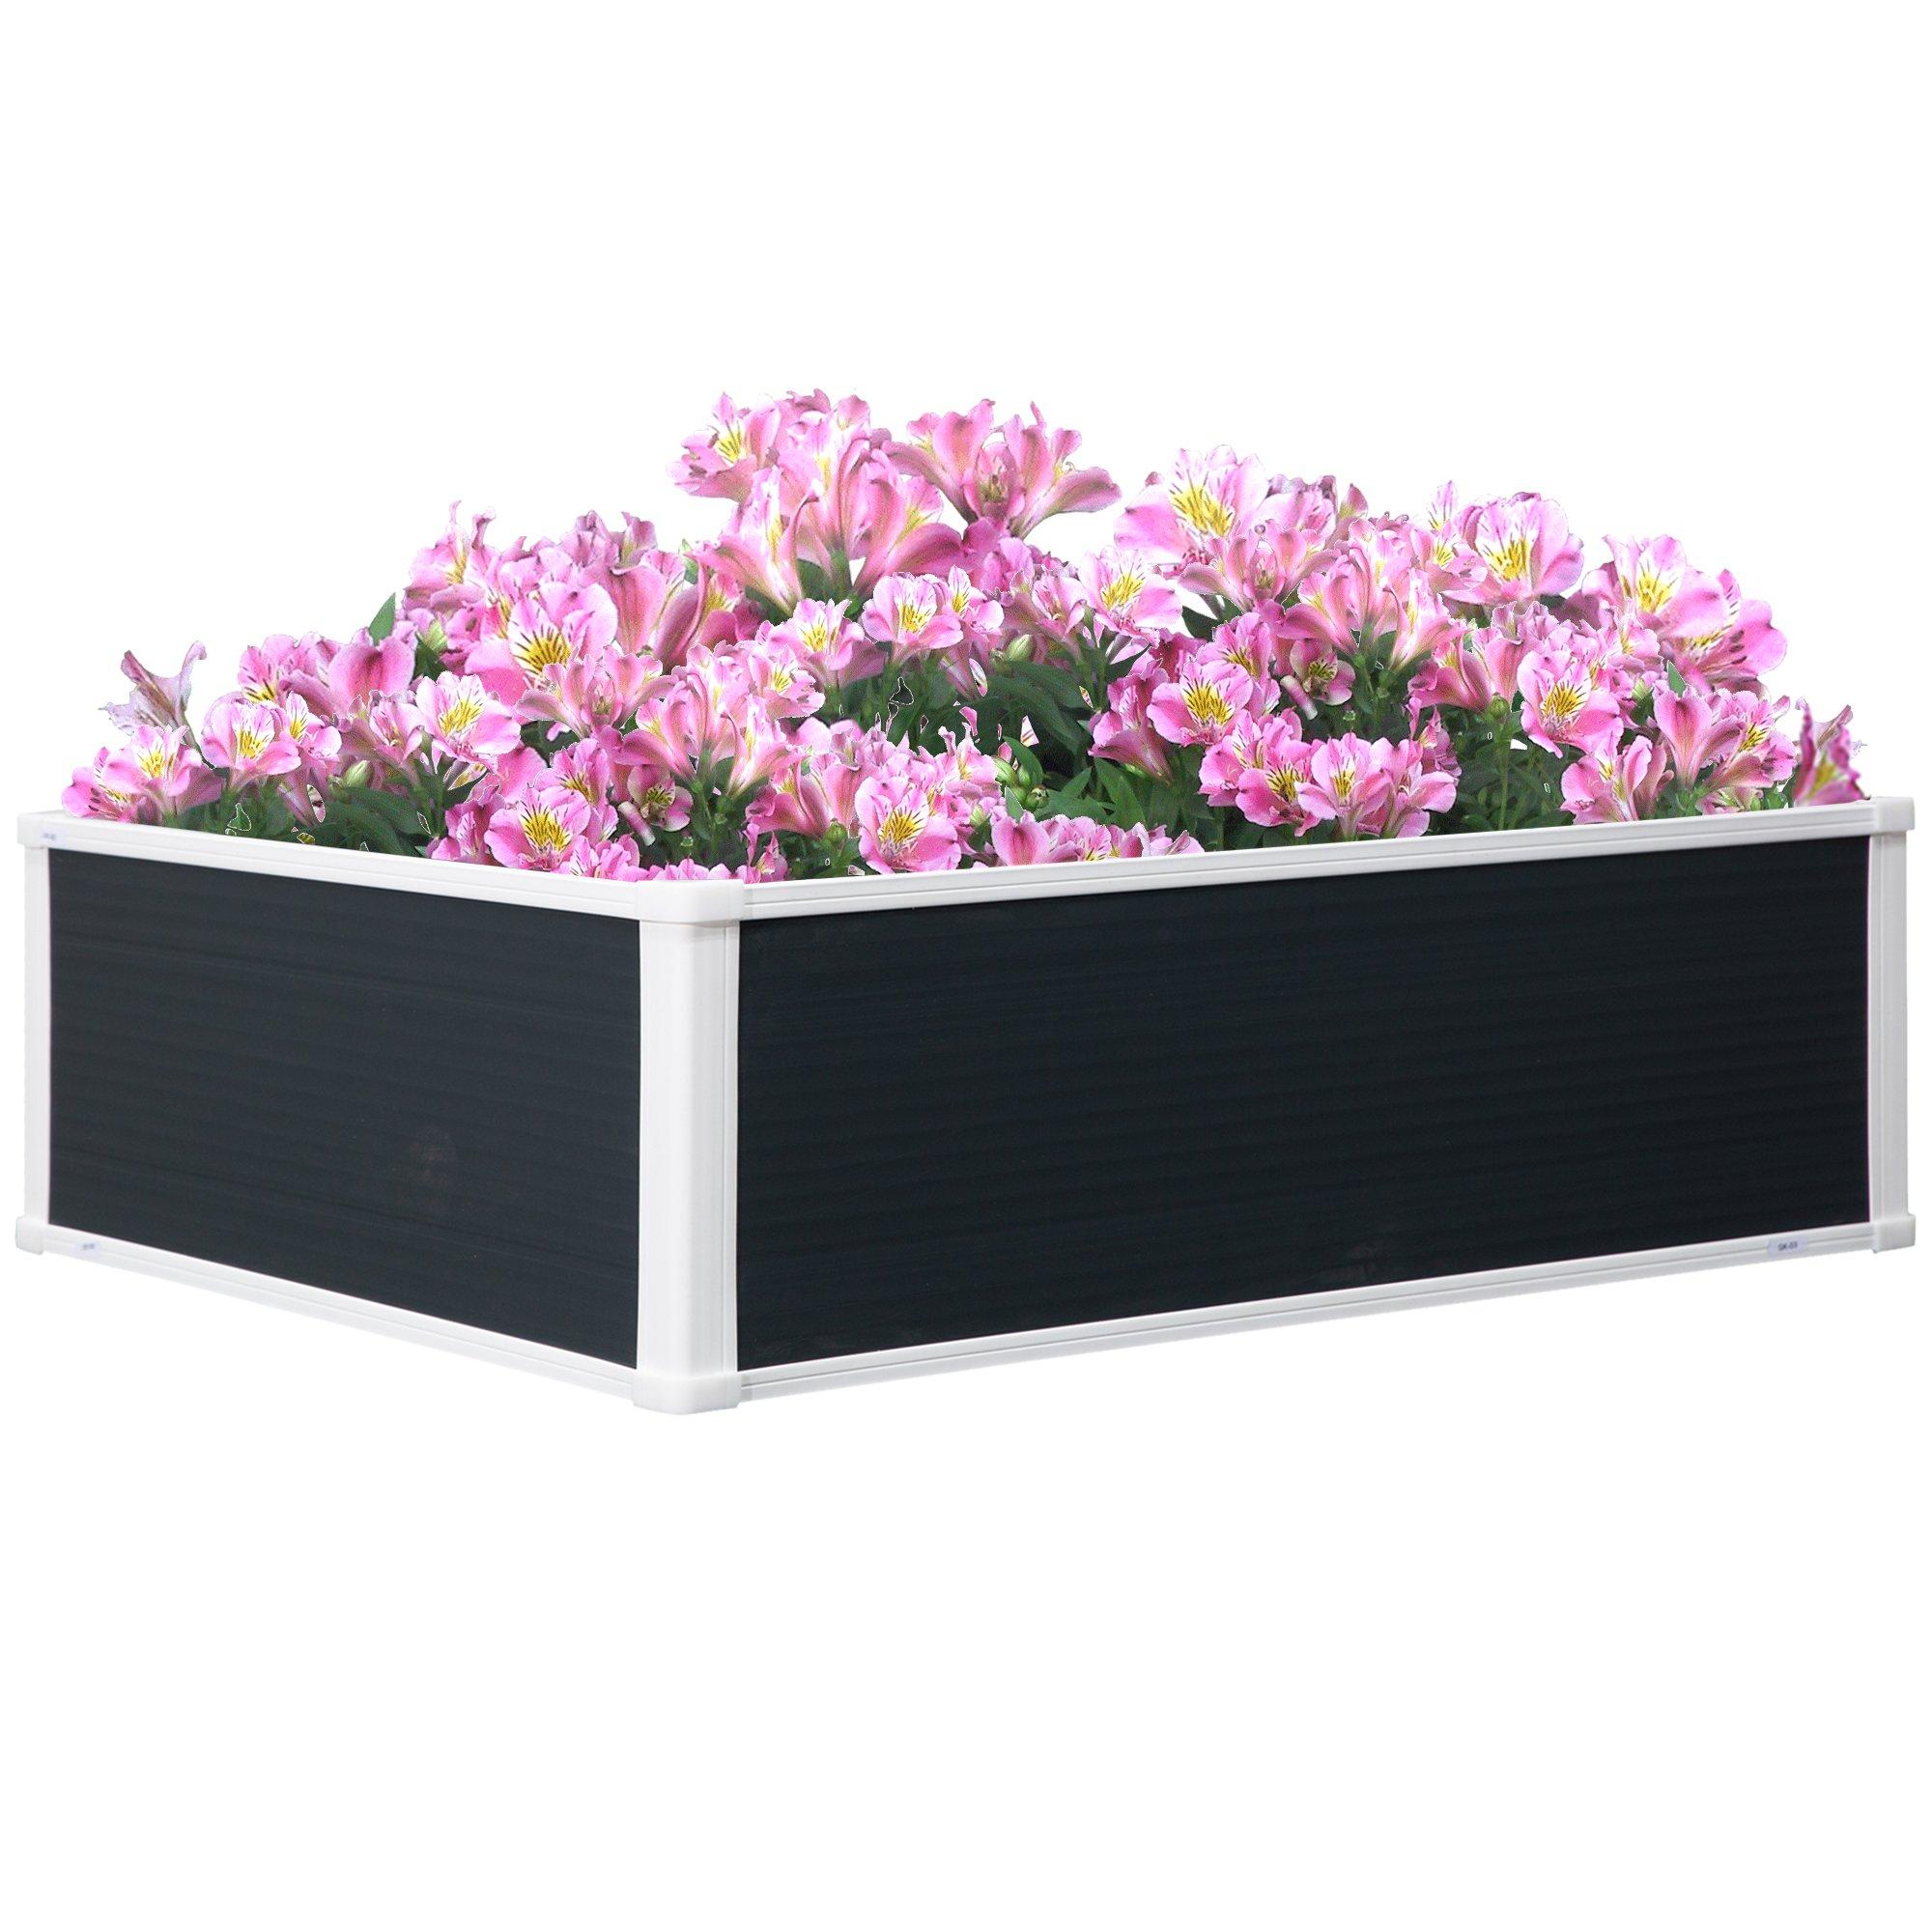 Garden Raised Bed Planter Grow Containers Flower Pot PP